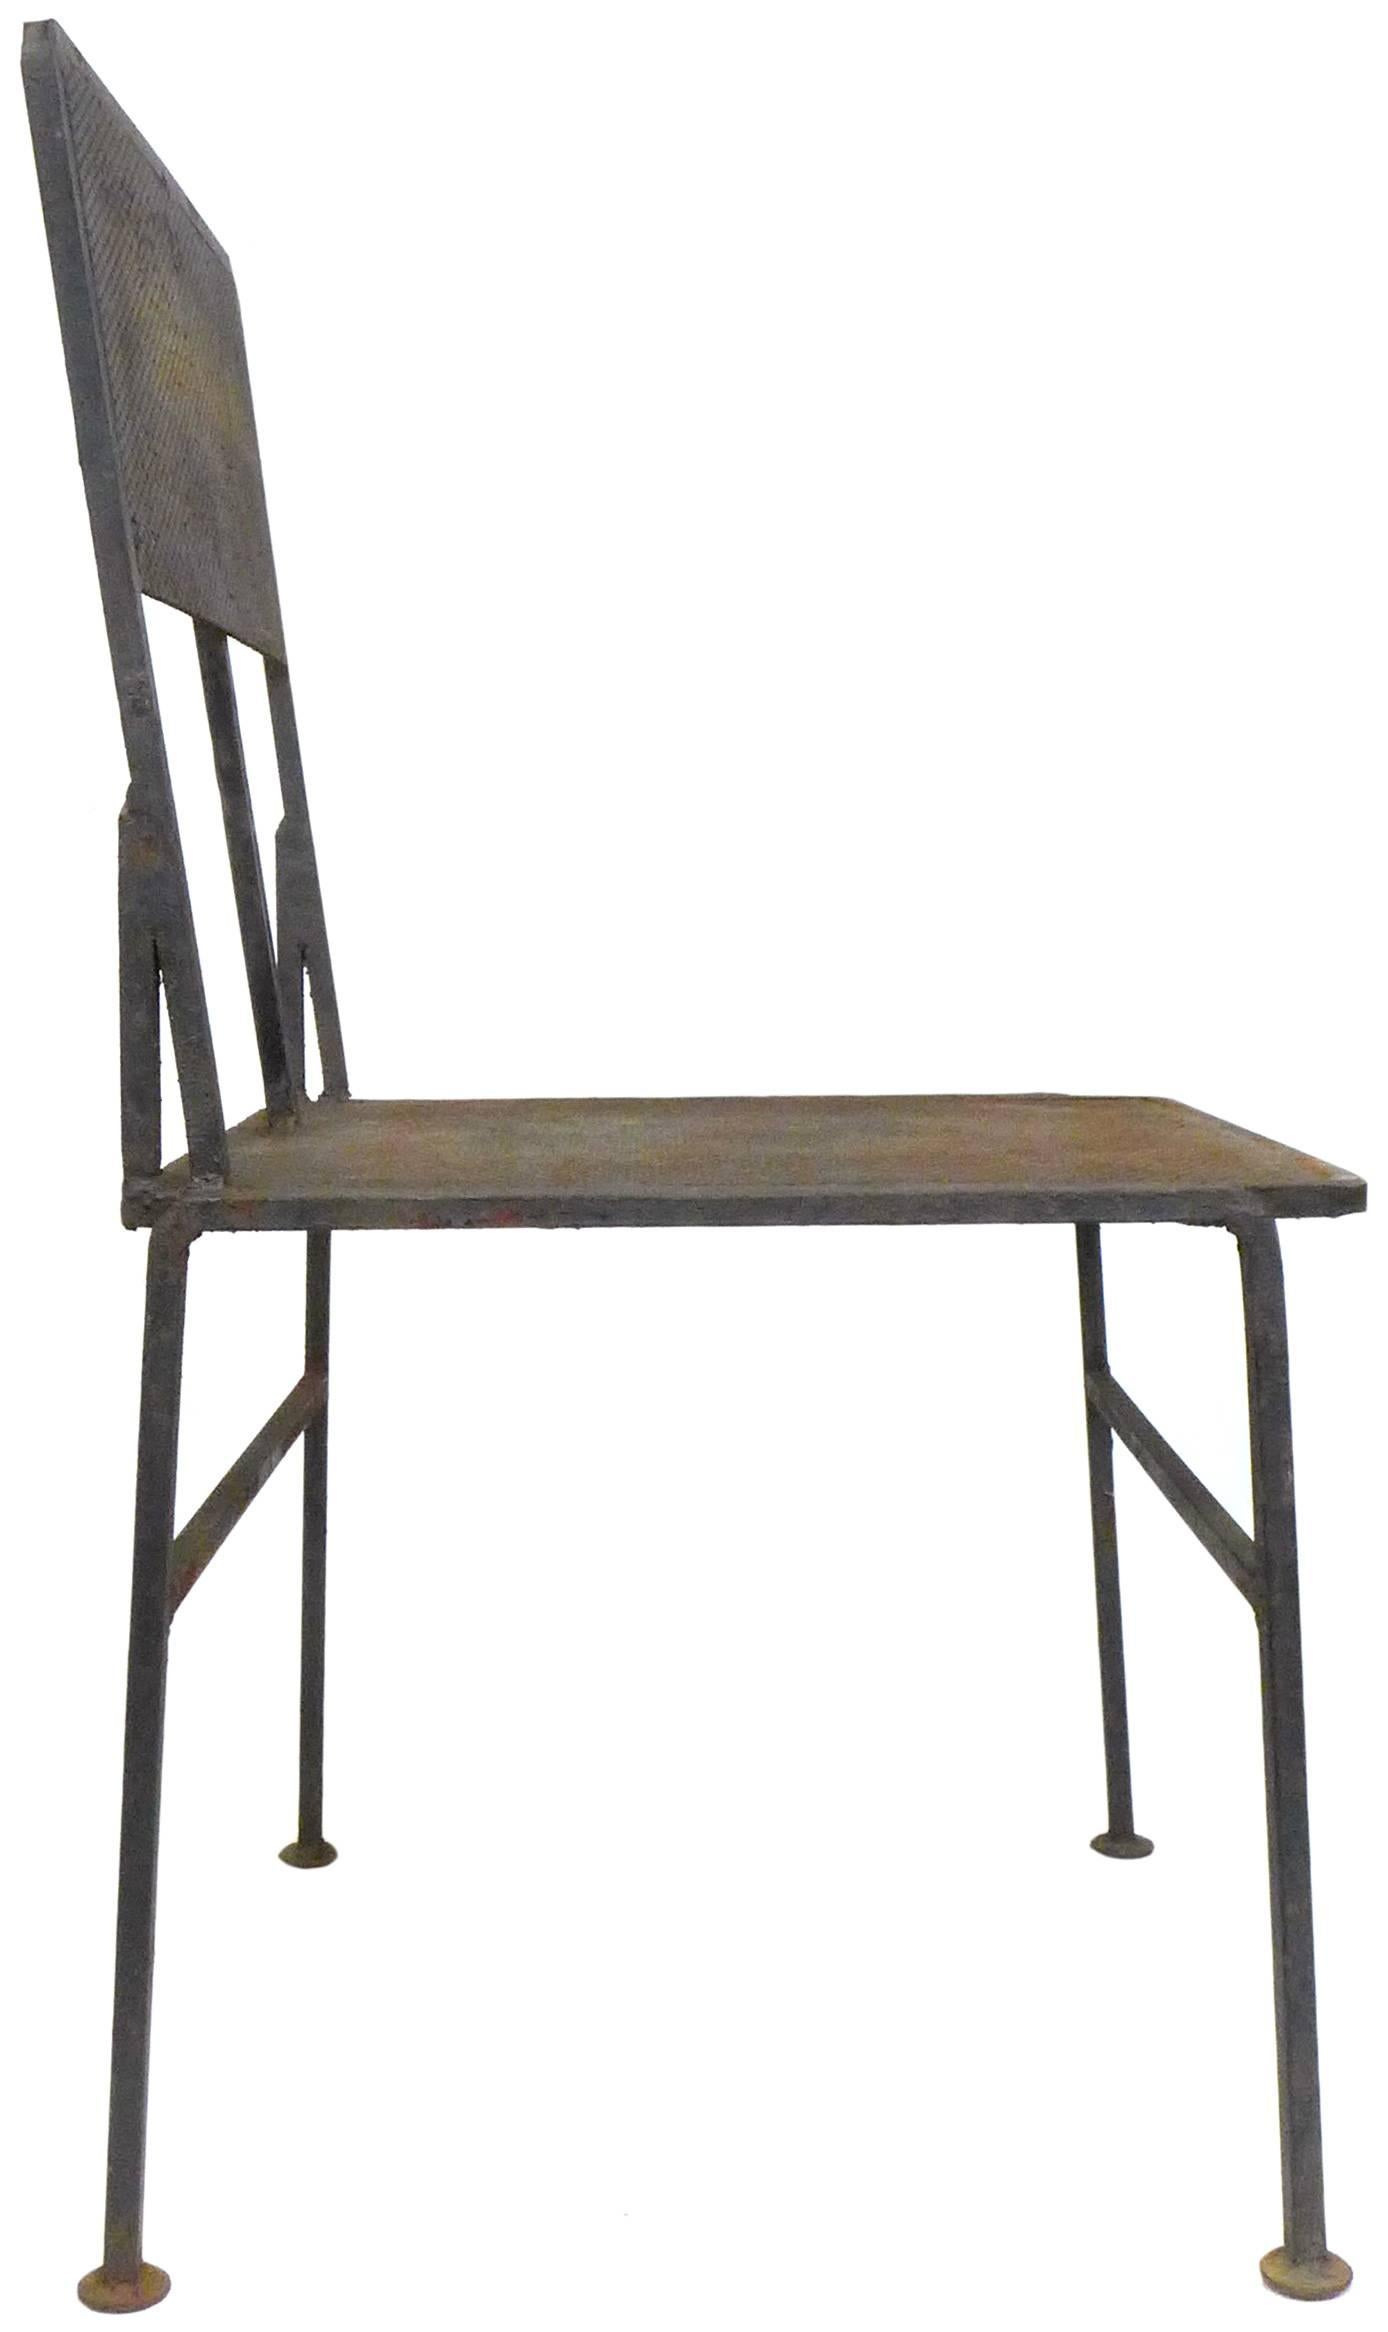 Mid-20th Century Perforated Iron Outdoor Table and Chairs Set